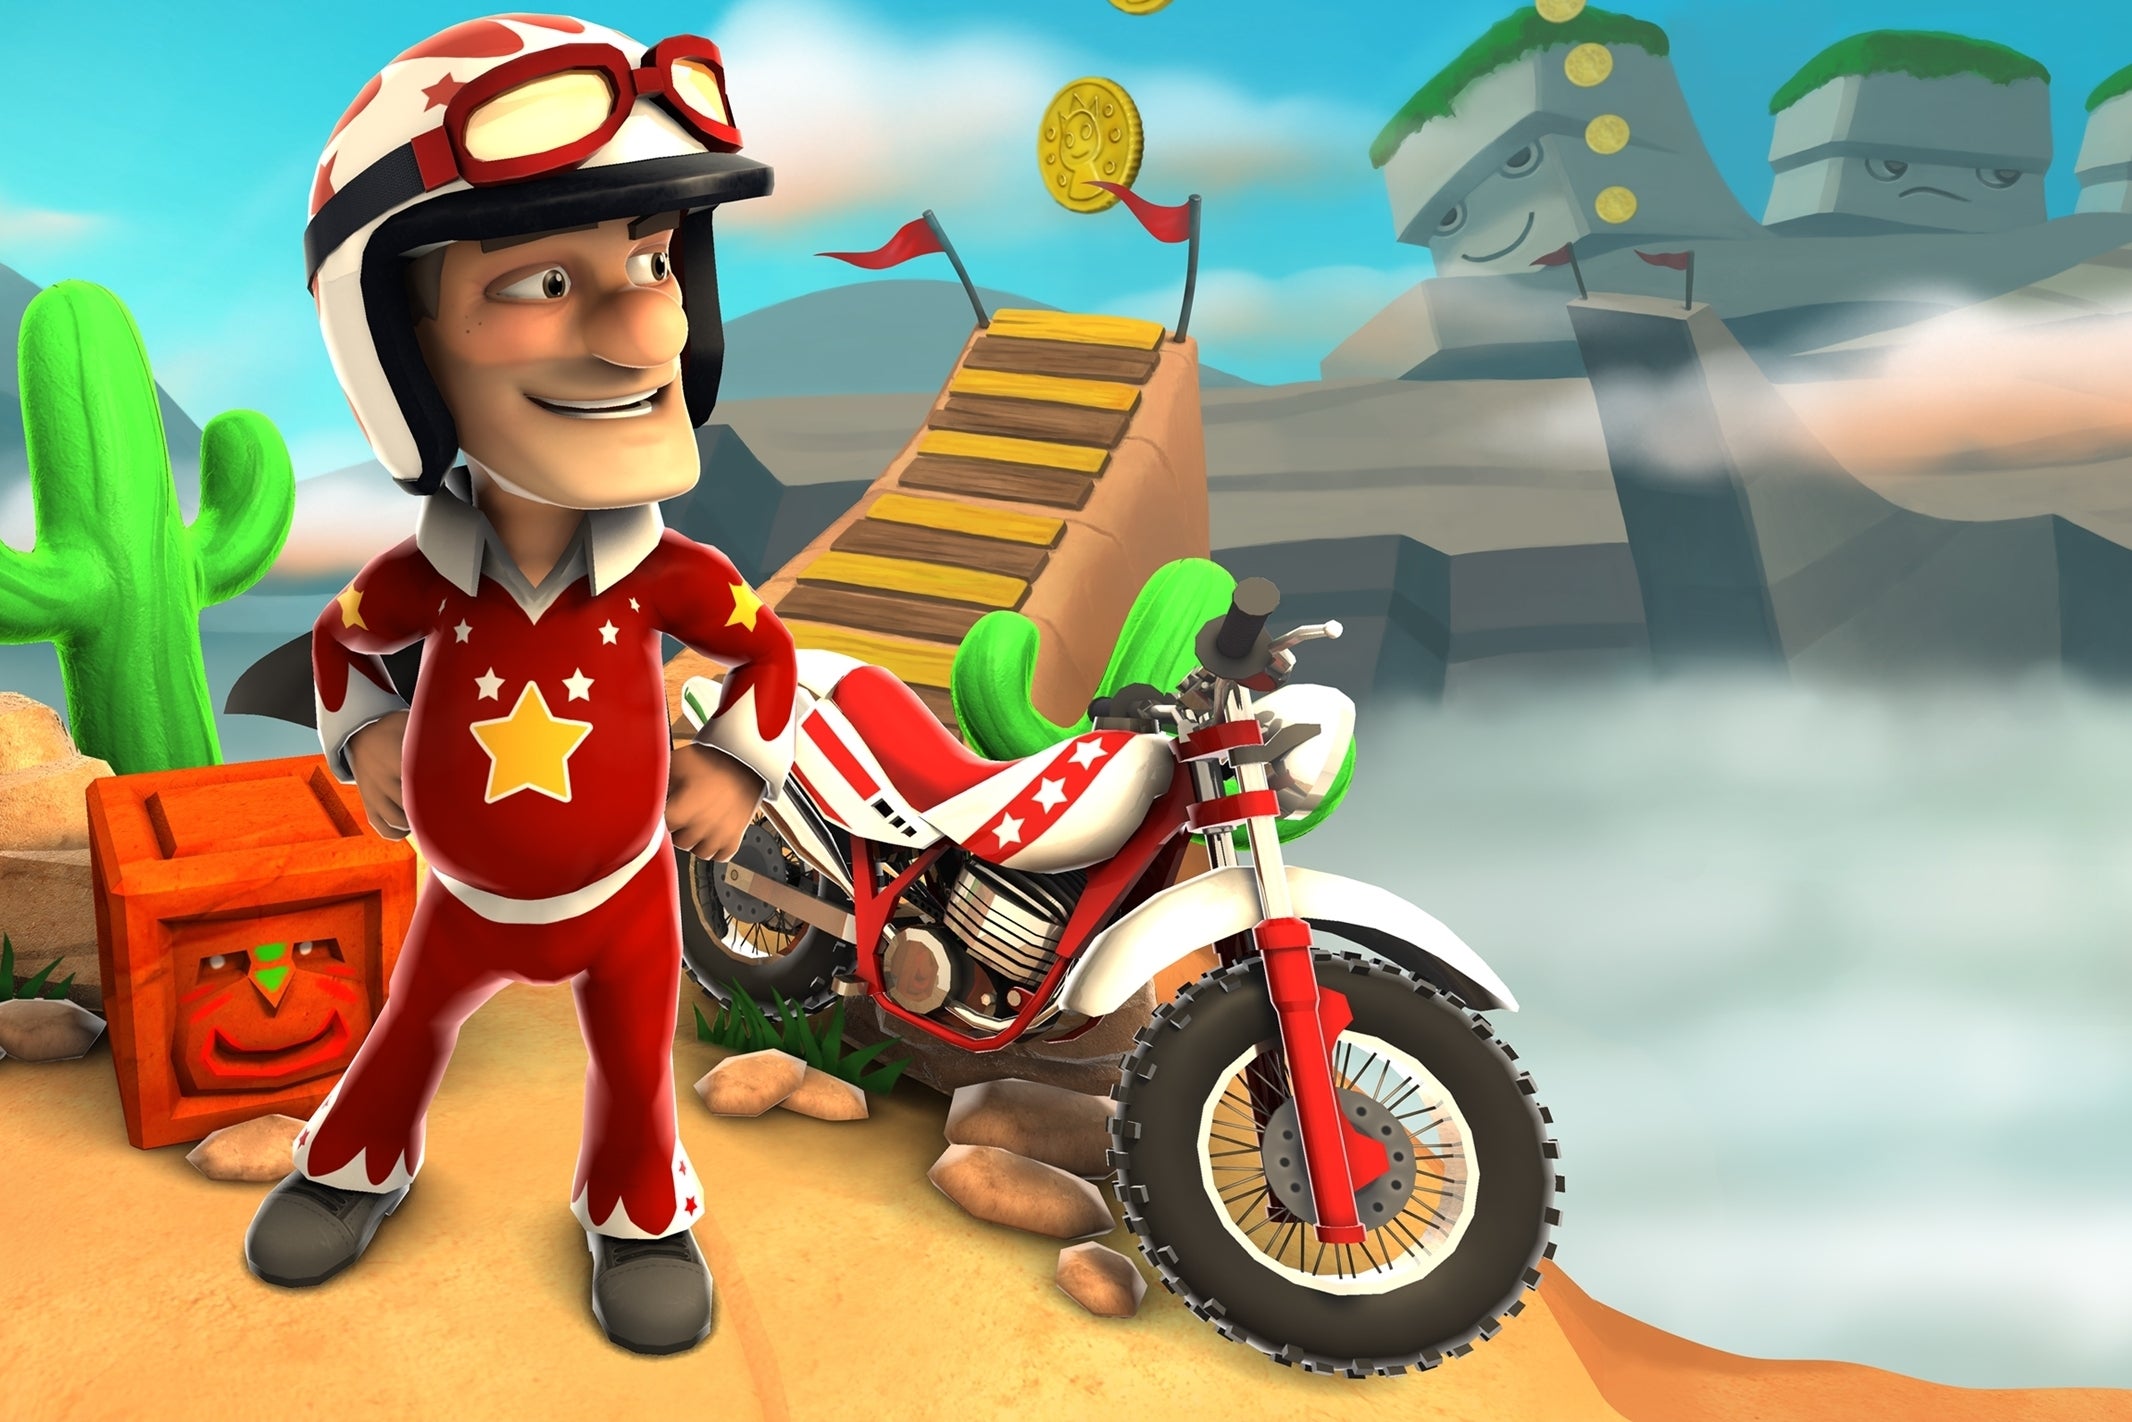 Image for Joe Danger 1 and 2 out on PlayStation Vita Q2 2014